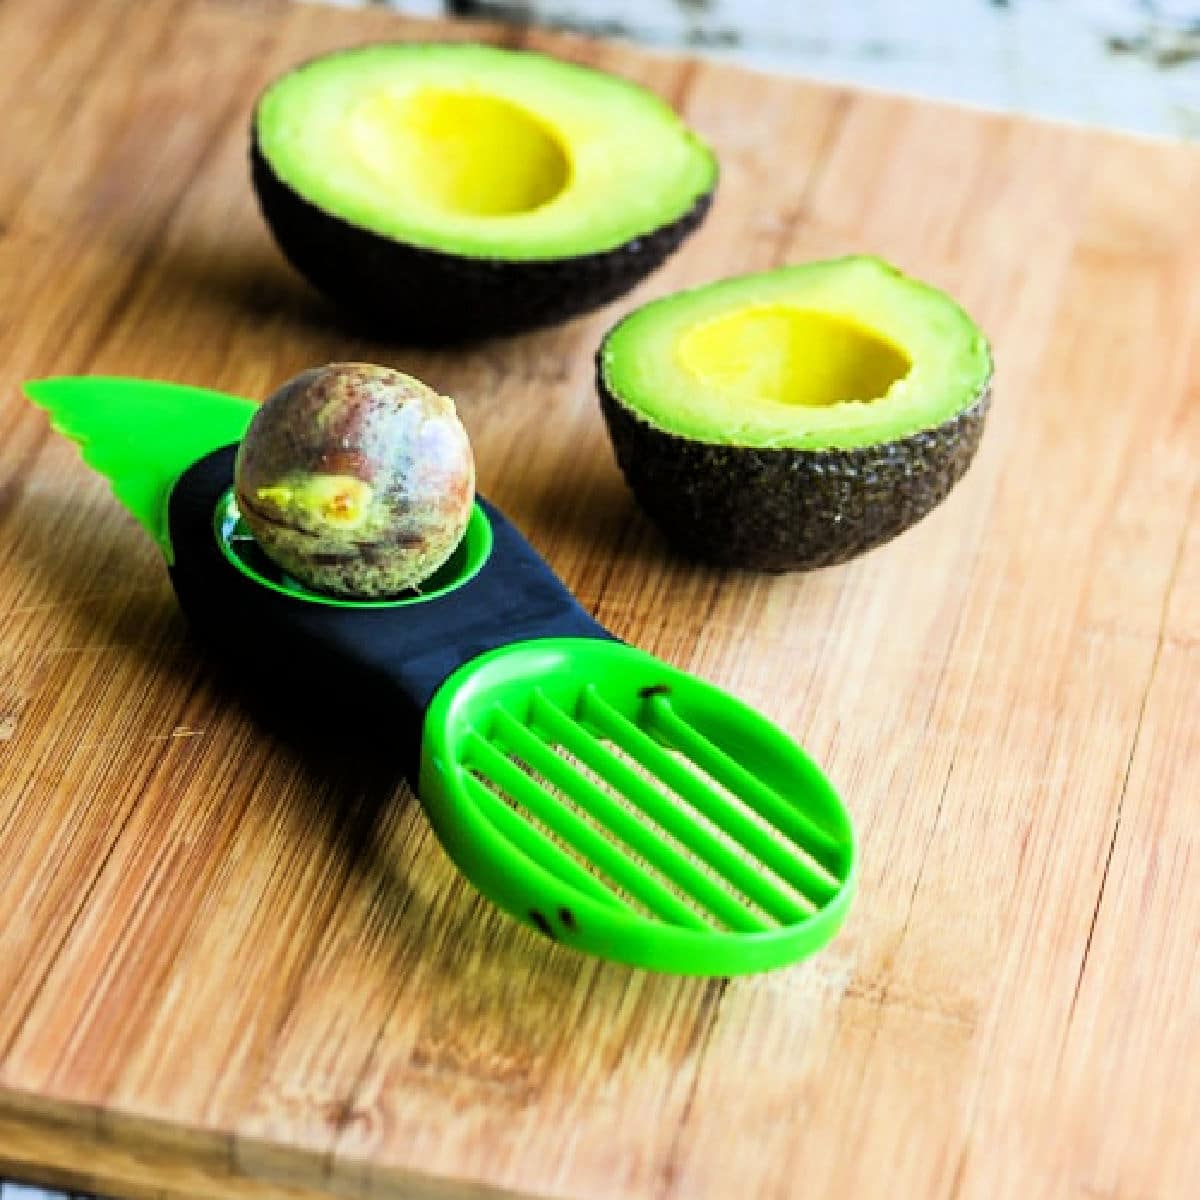 Square image for Kalyn's Kitchen Picks: OXO Avocado Tool showing avocado and tool on cutting board.